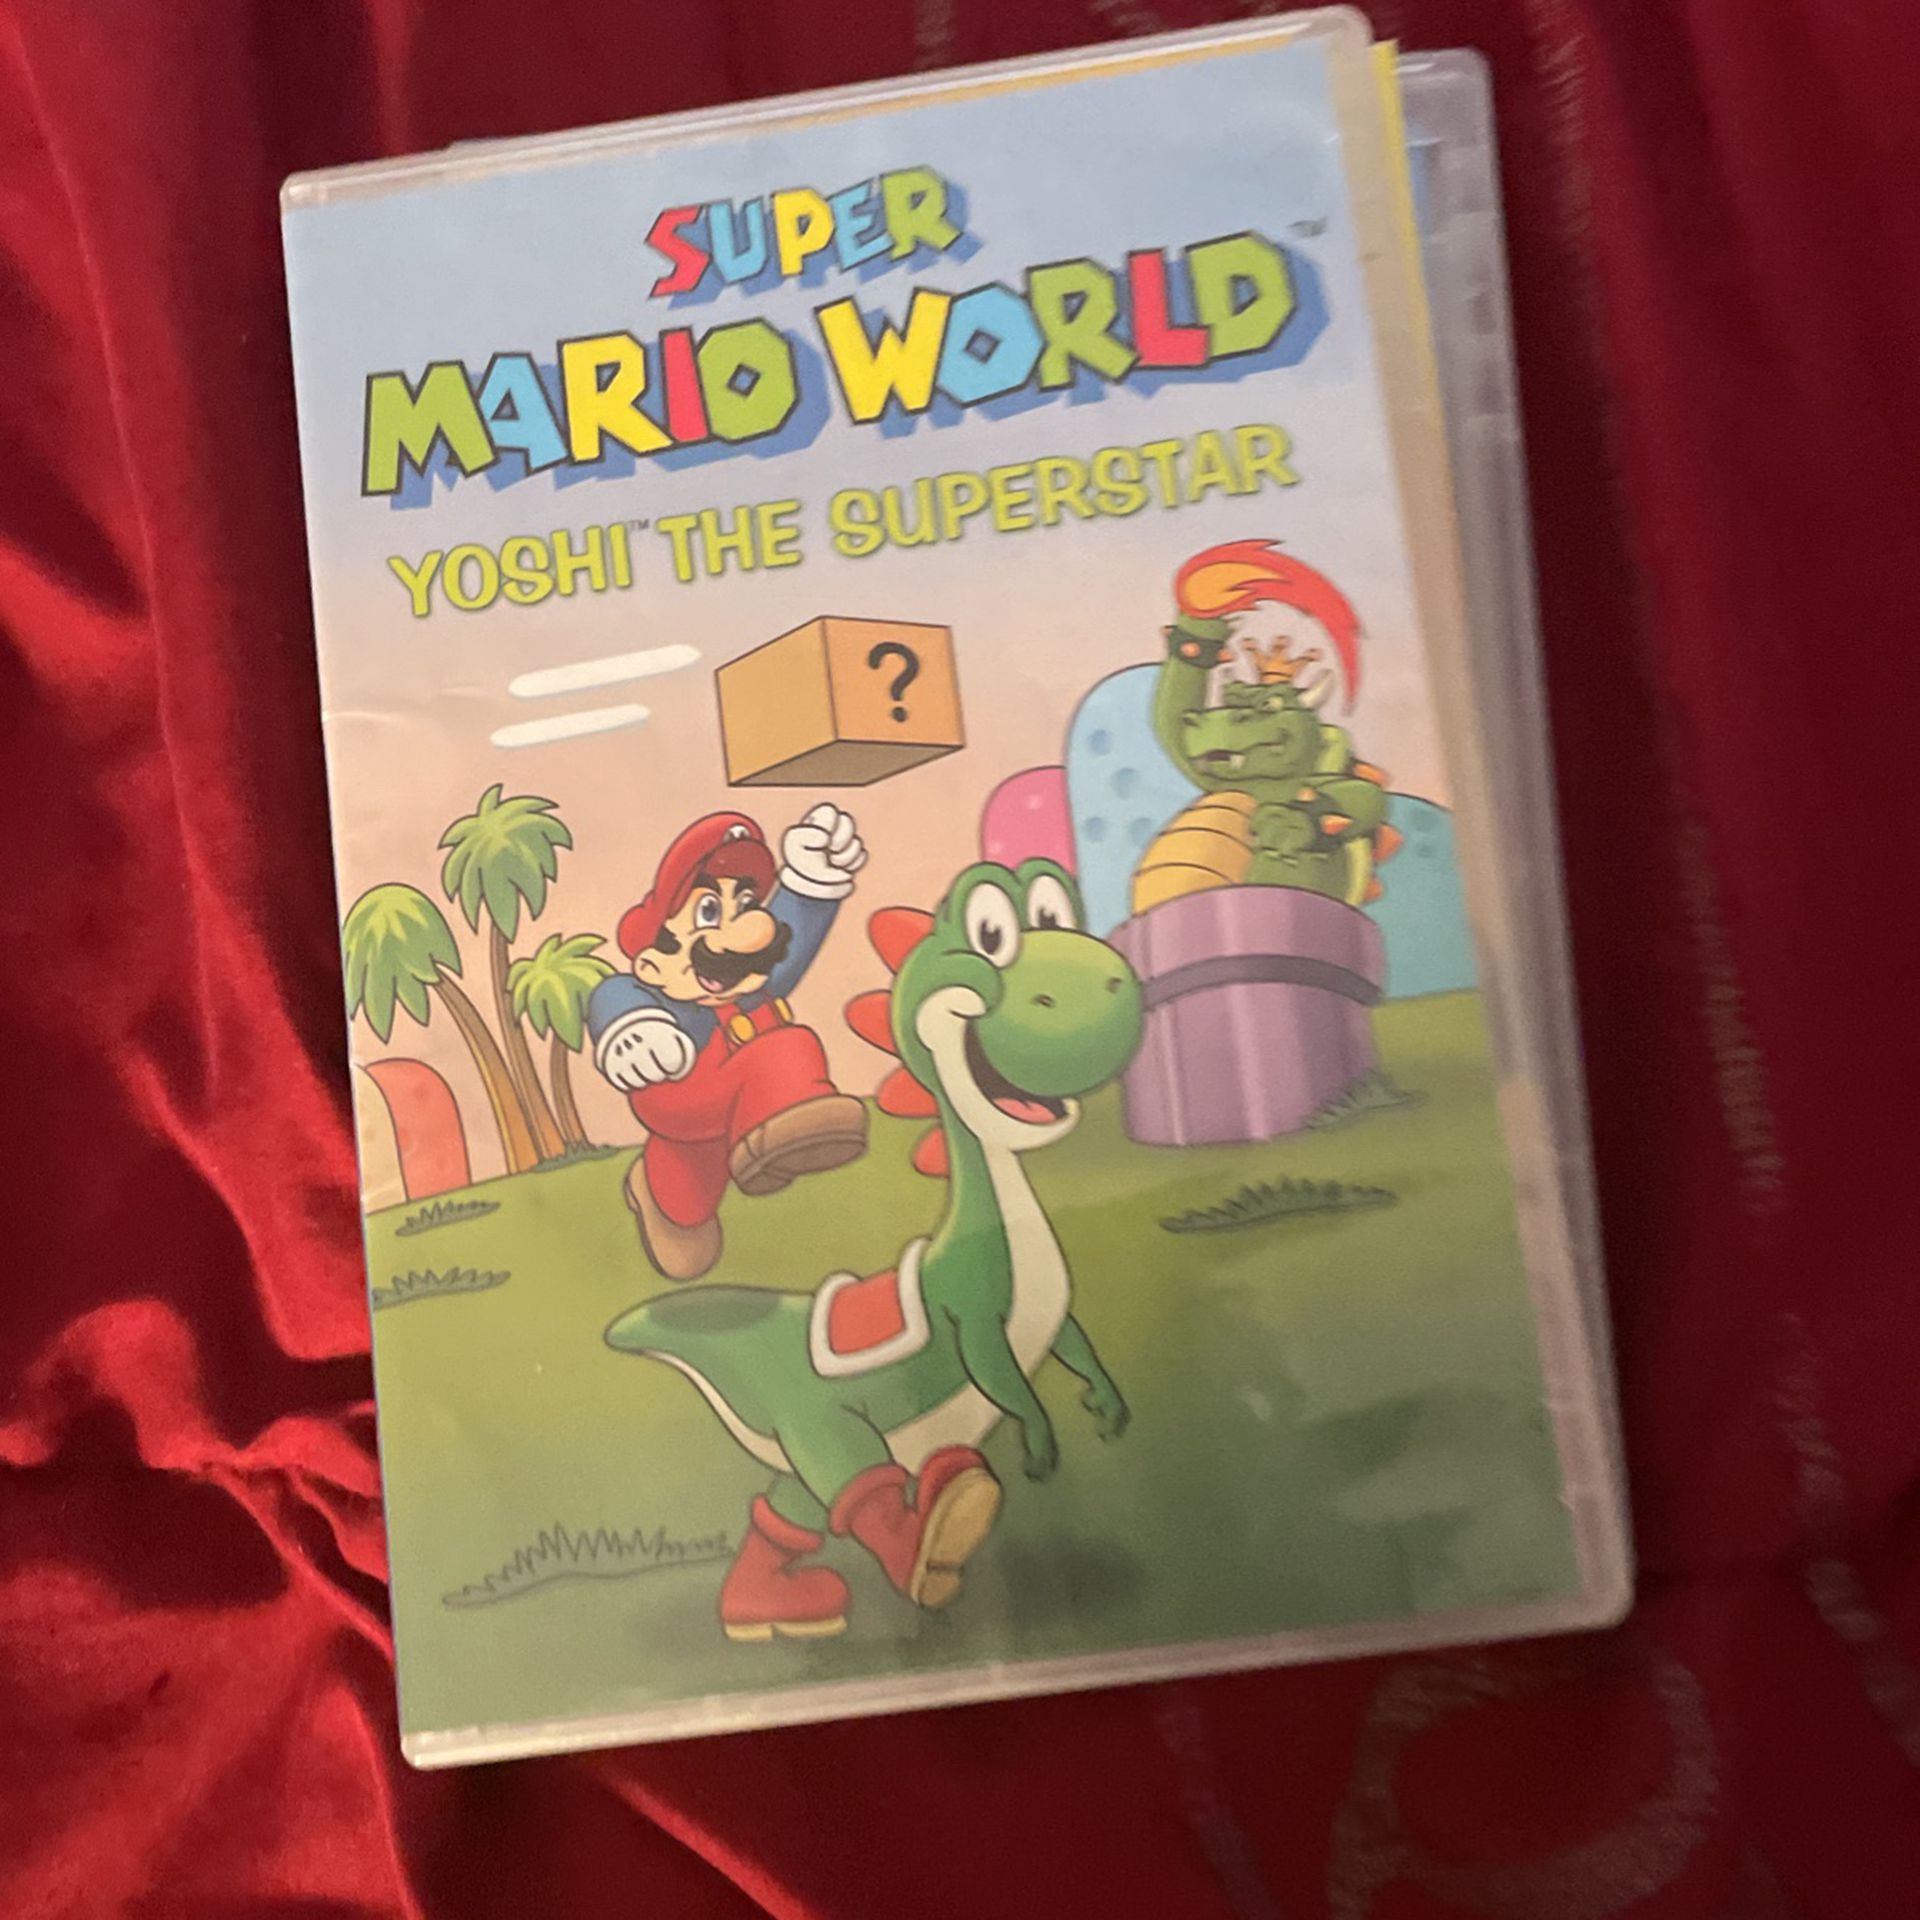 Super Mario World Yoshi The SuperStar DVD for Sale in San